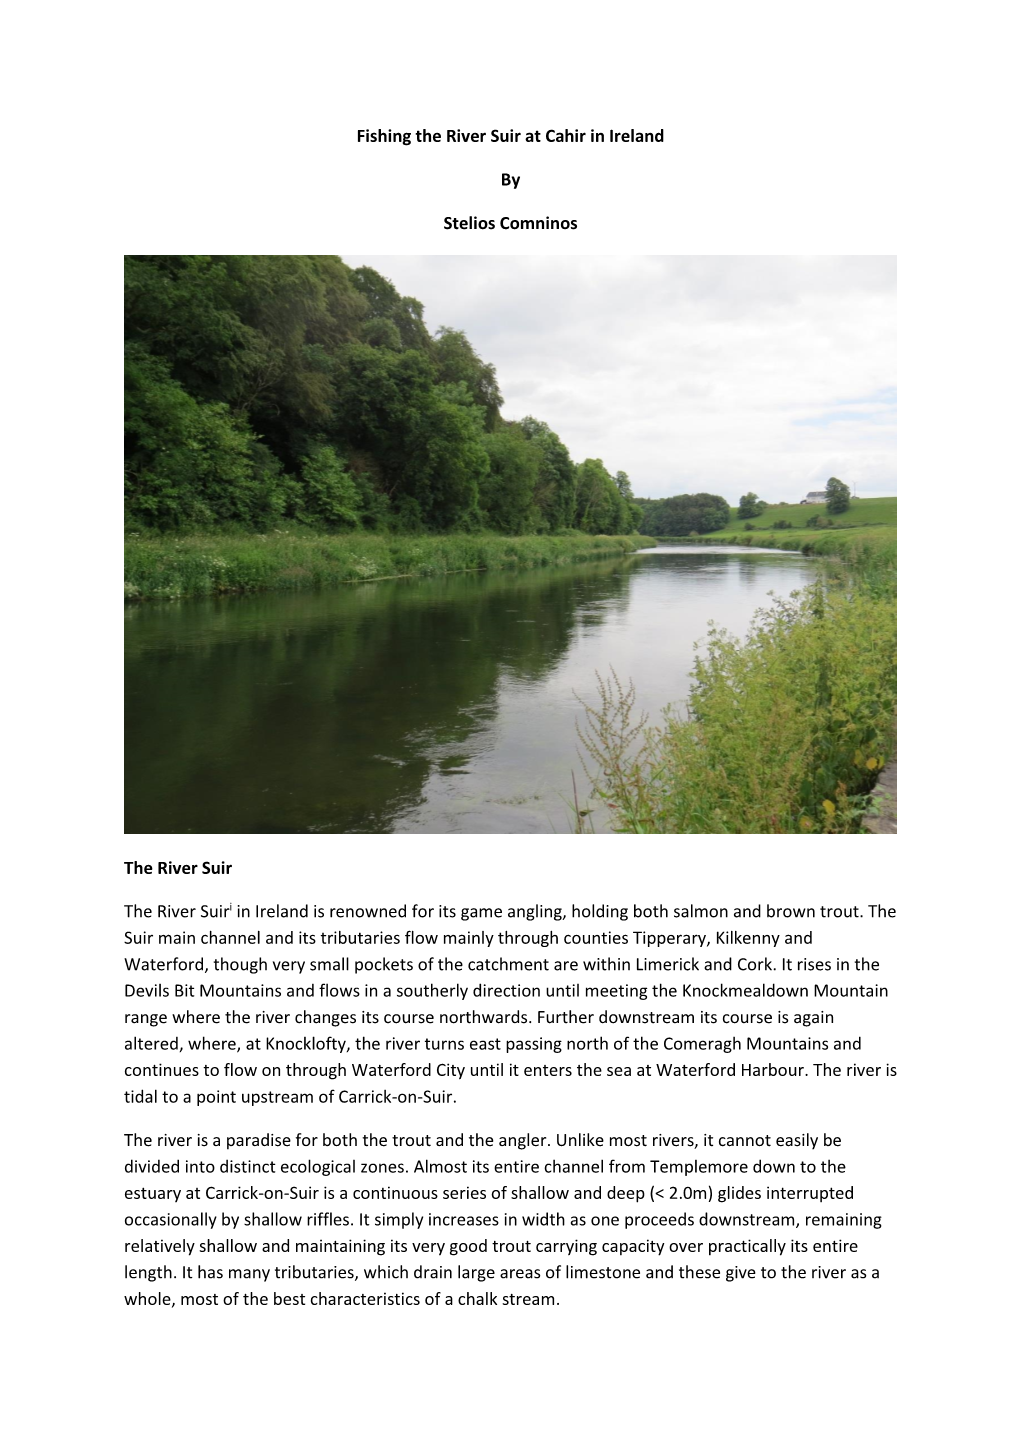 Fishing the River Suir at Cahir in Ireland by Stelios Comninos The